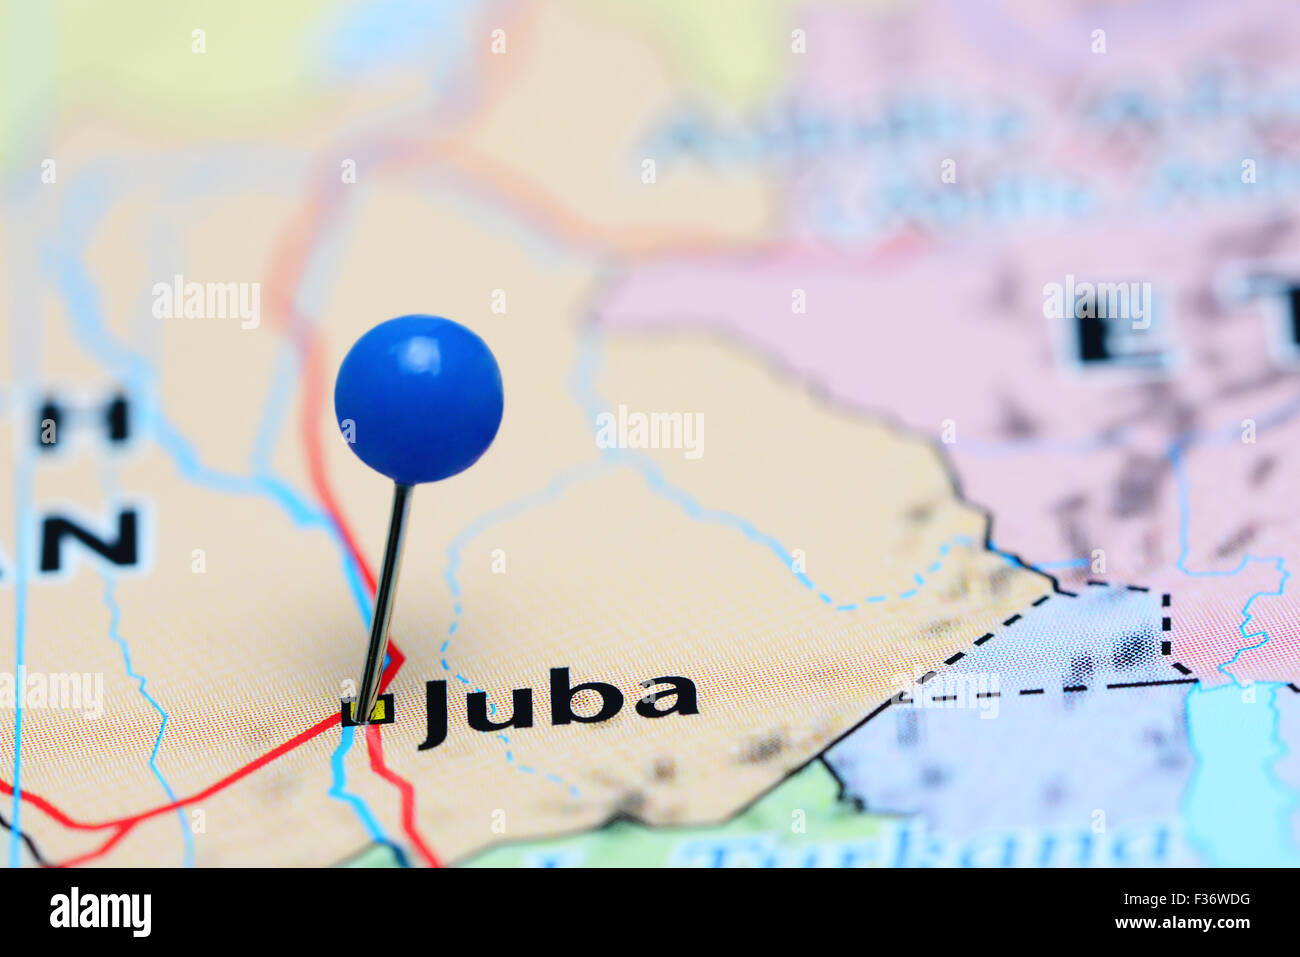 Juba pinned on a map of Asia Stock Photo